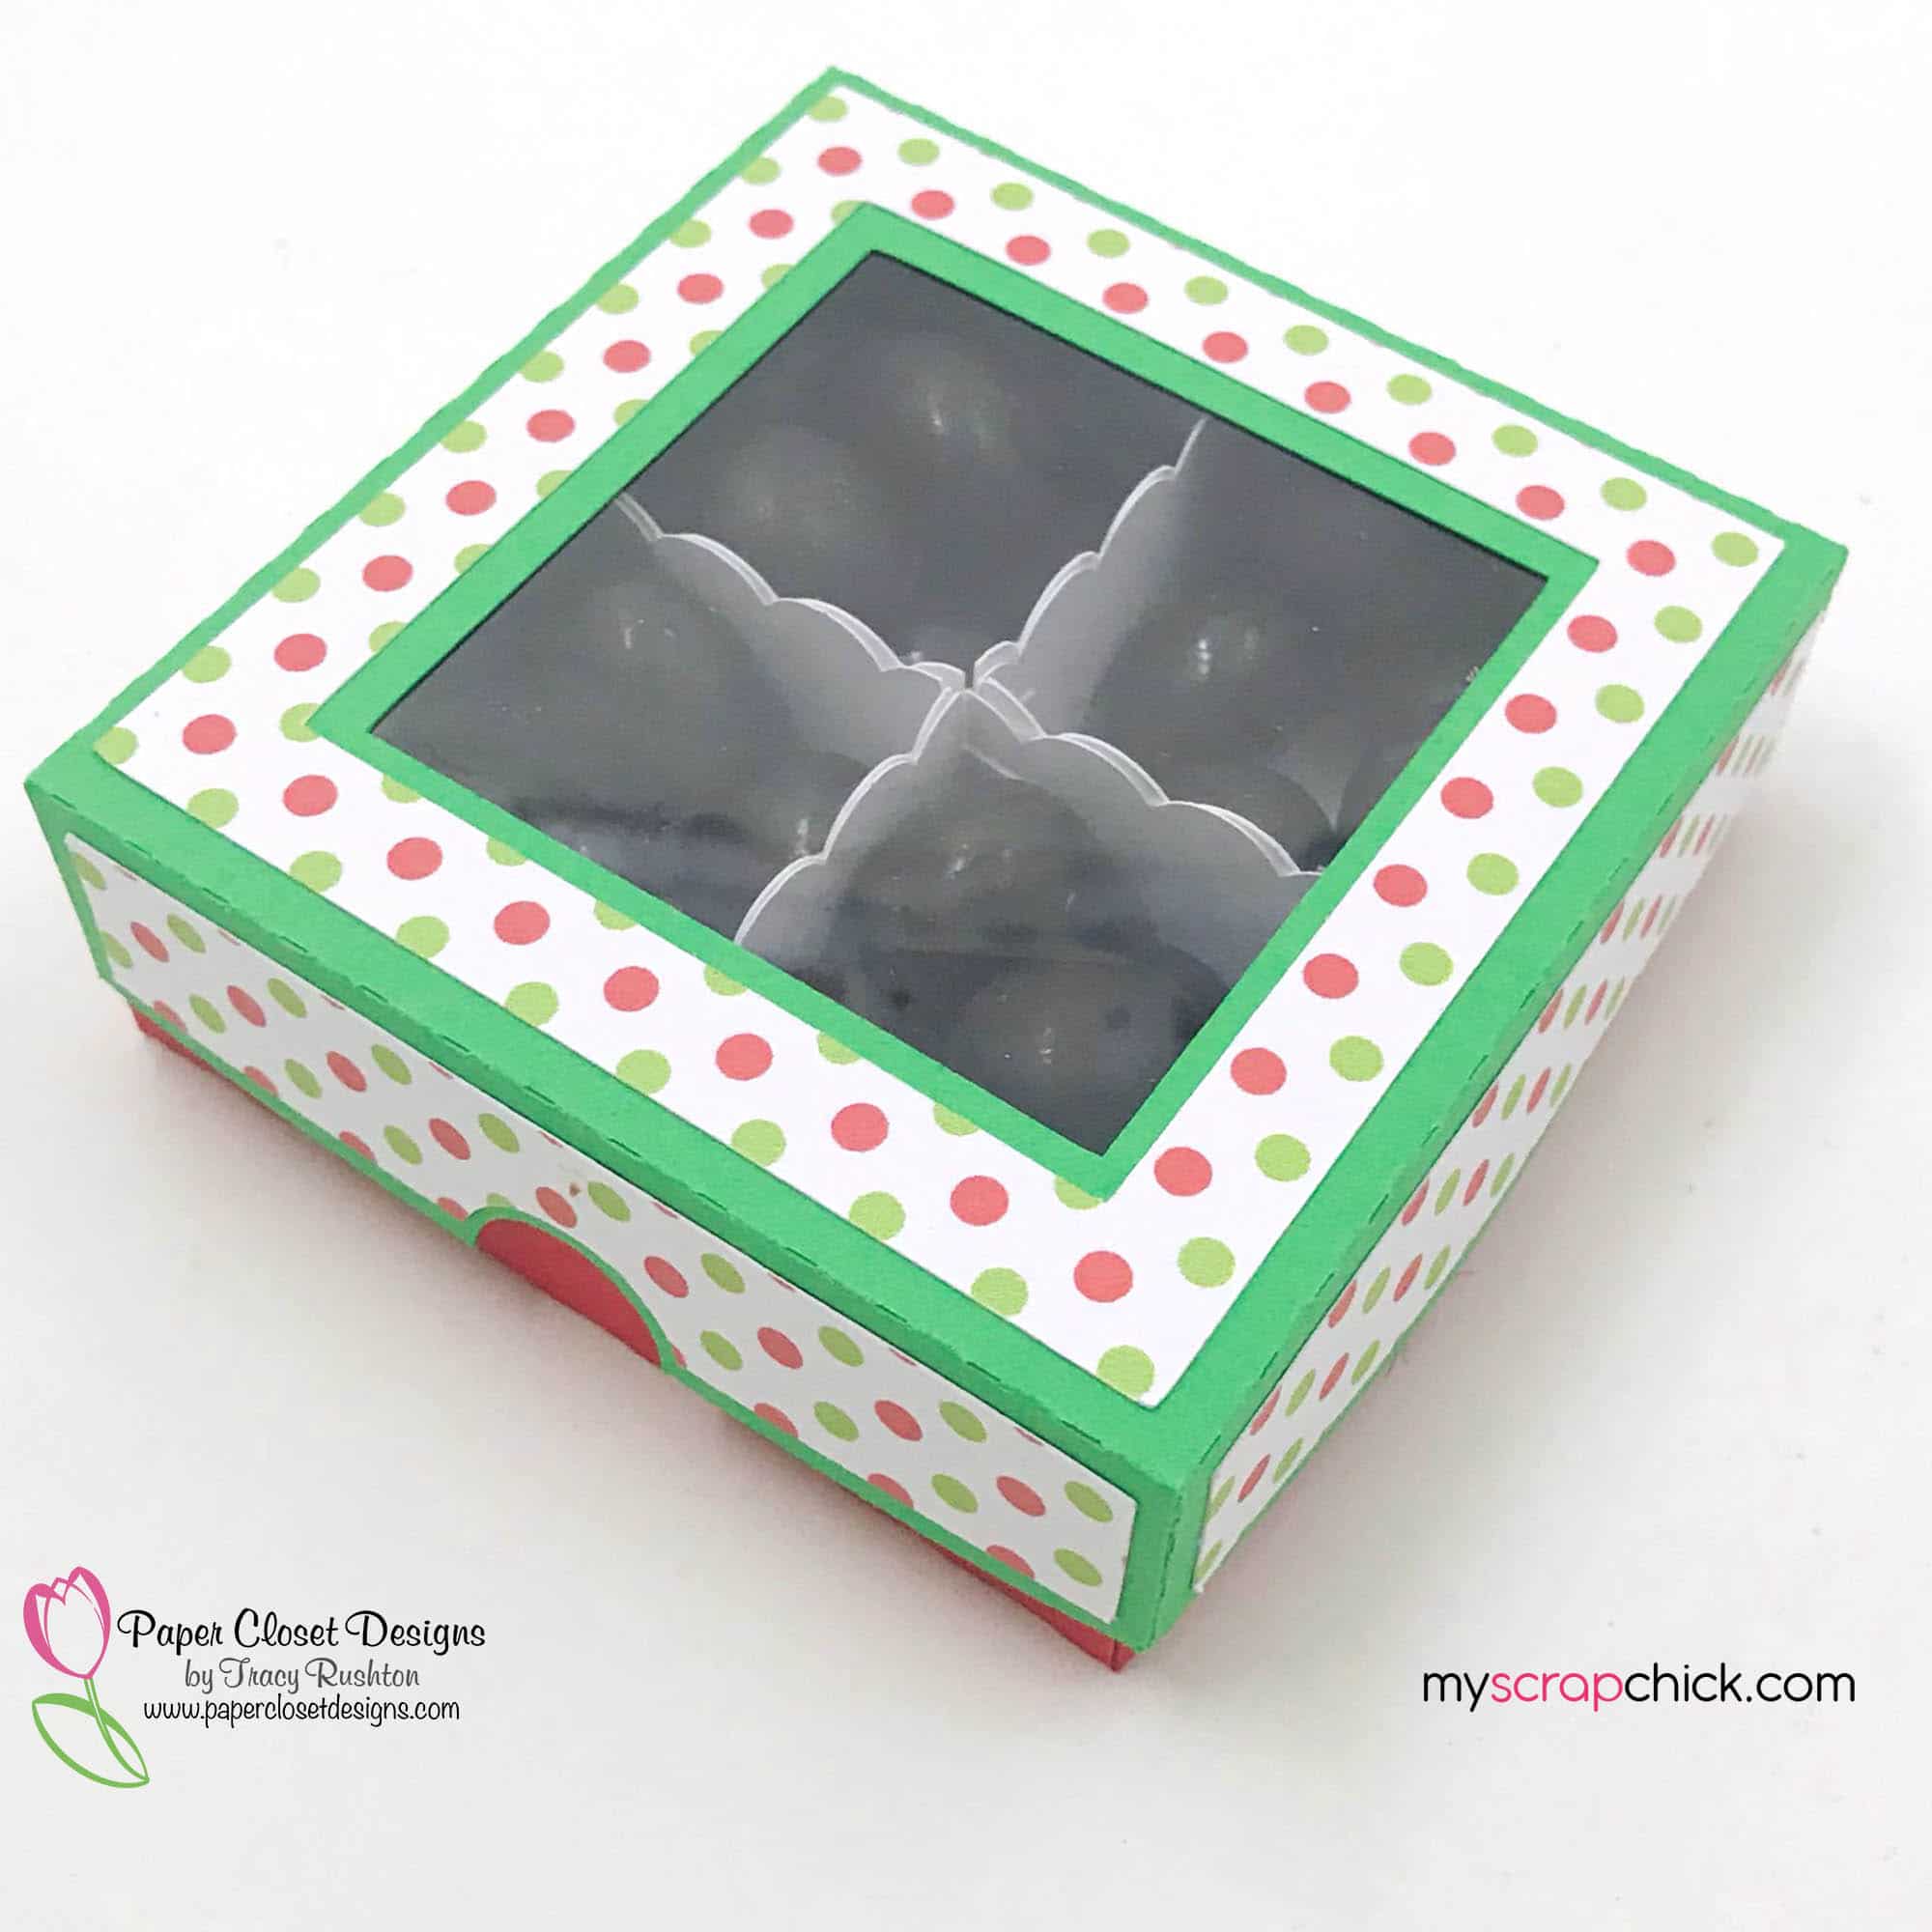 2x2 Candy Box Lid and Liners 5